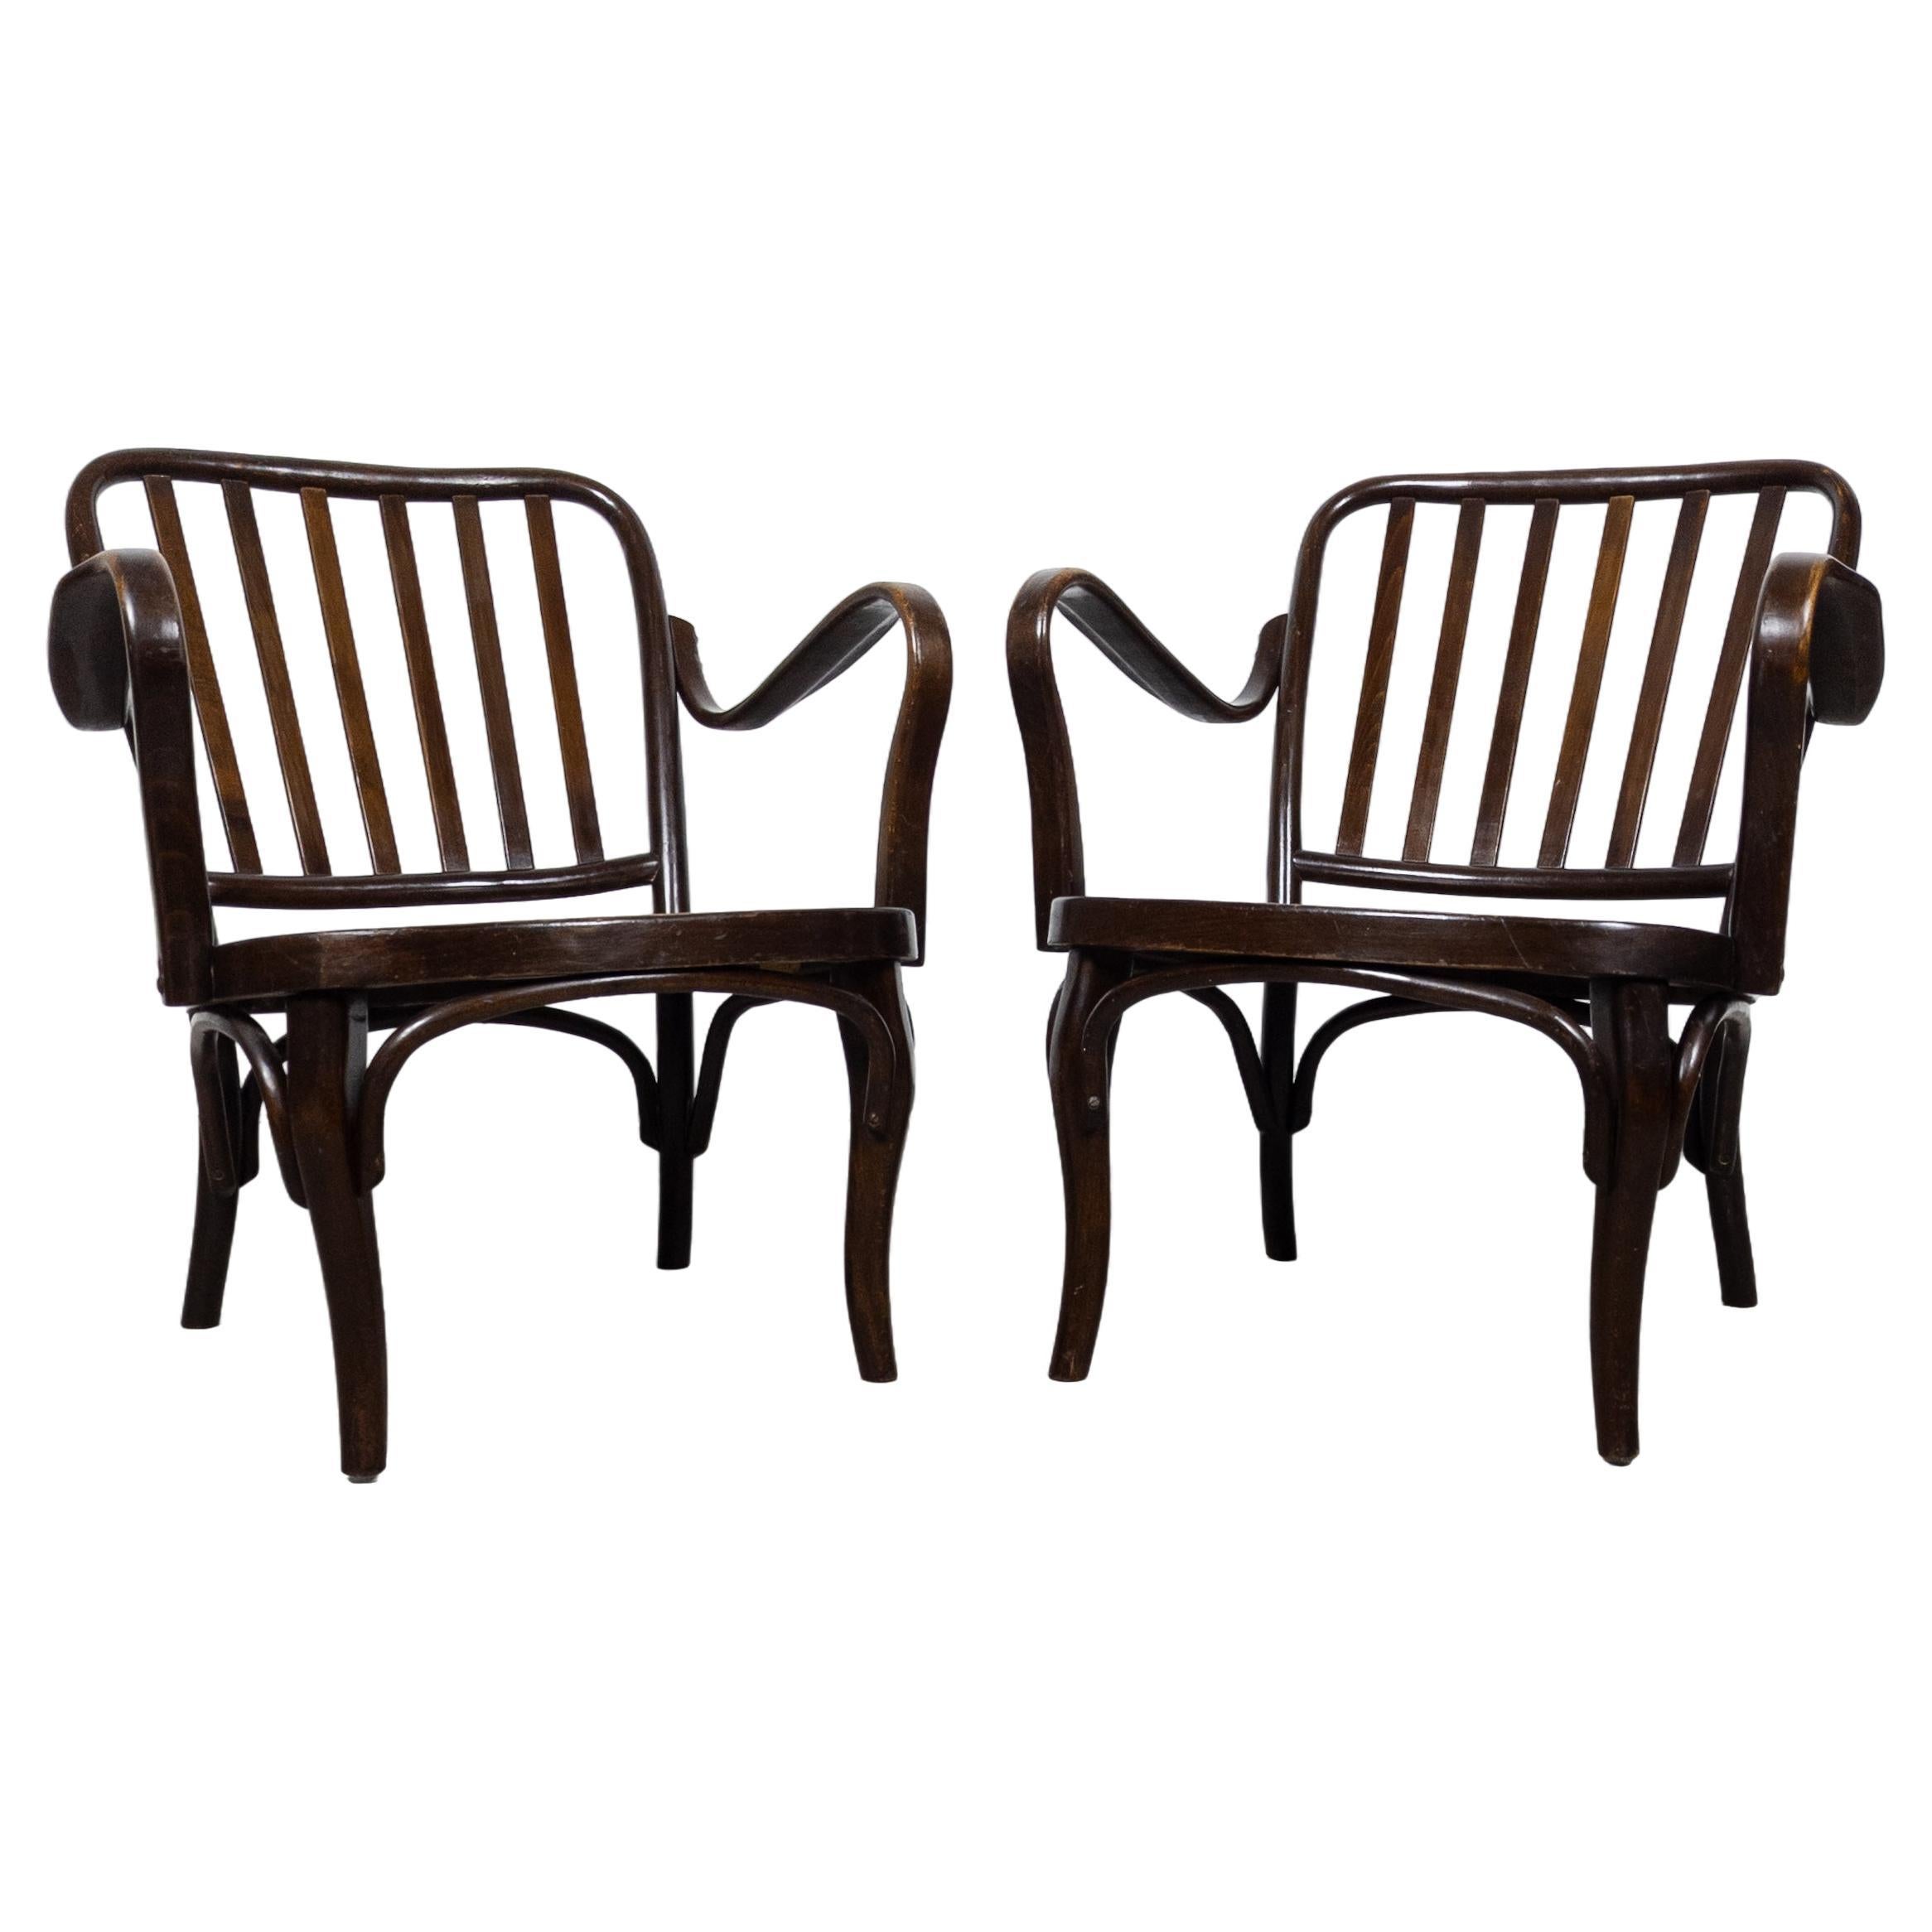 Pair of fireside armchairs Thonet A 752 by Josef Frank